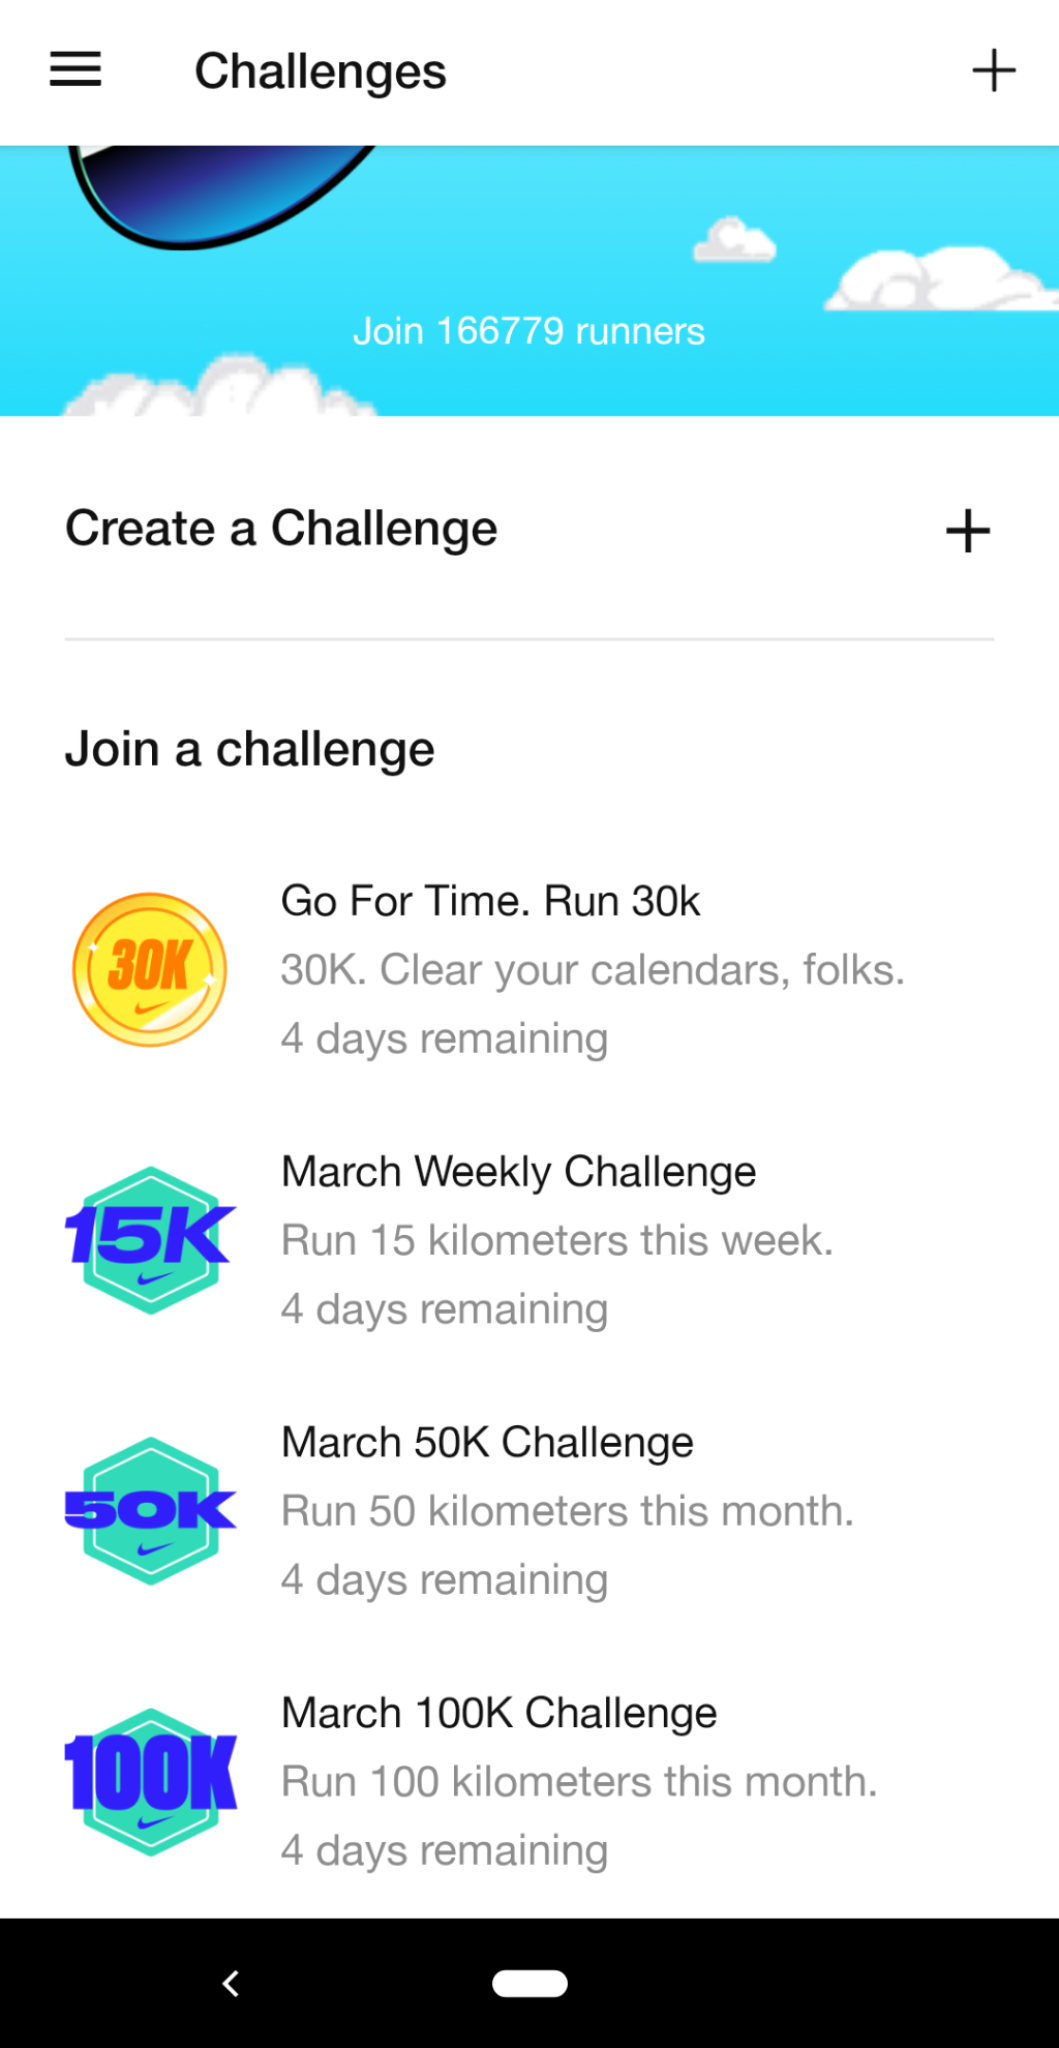 Gamification Applied in the Nike Run Club Sports Application (Source: GoodUX by Appcues)